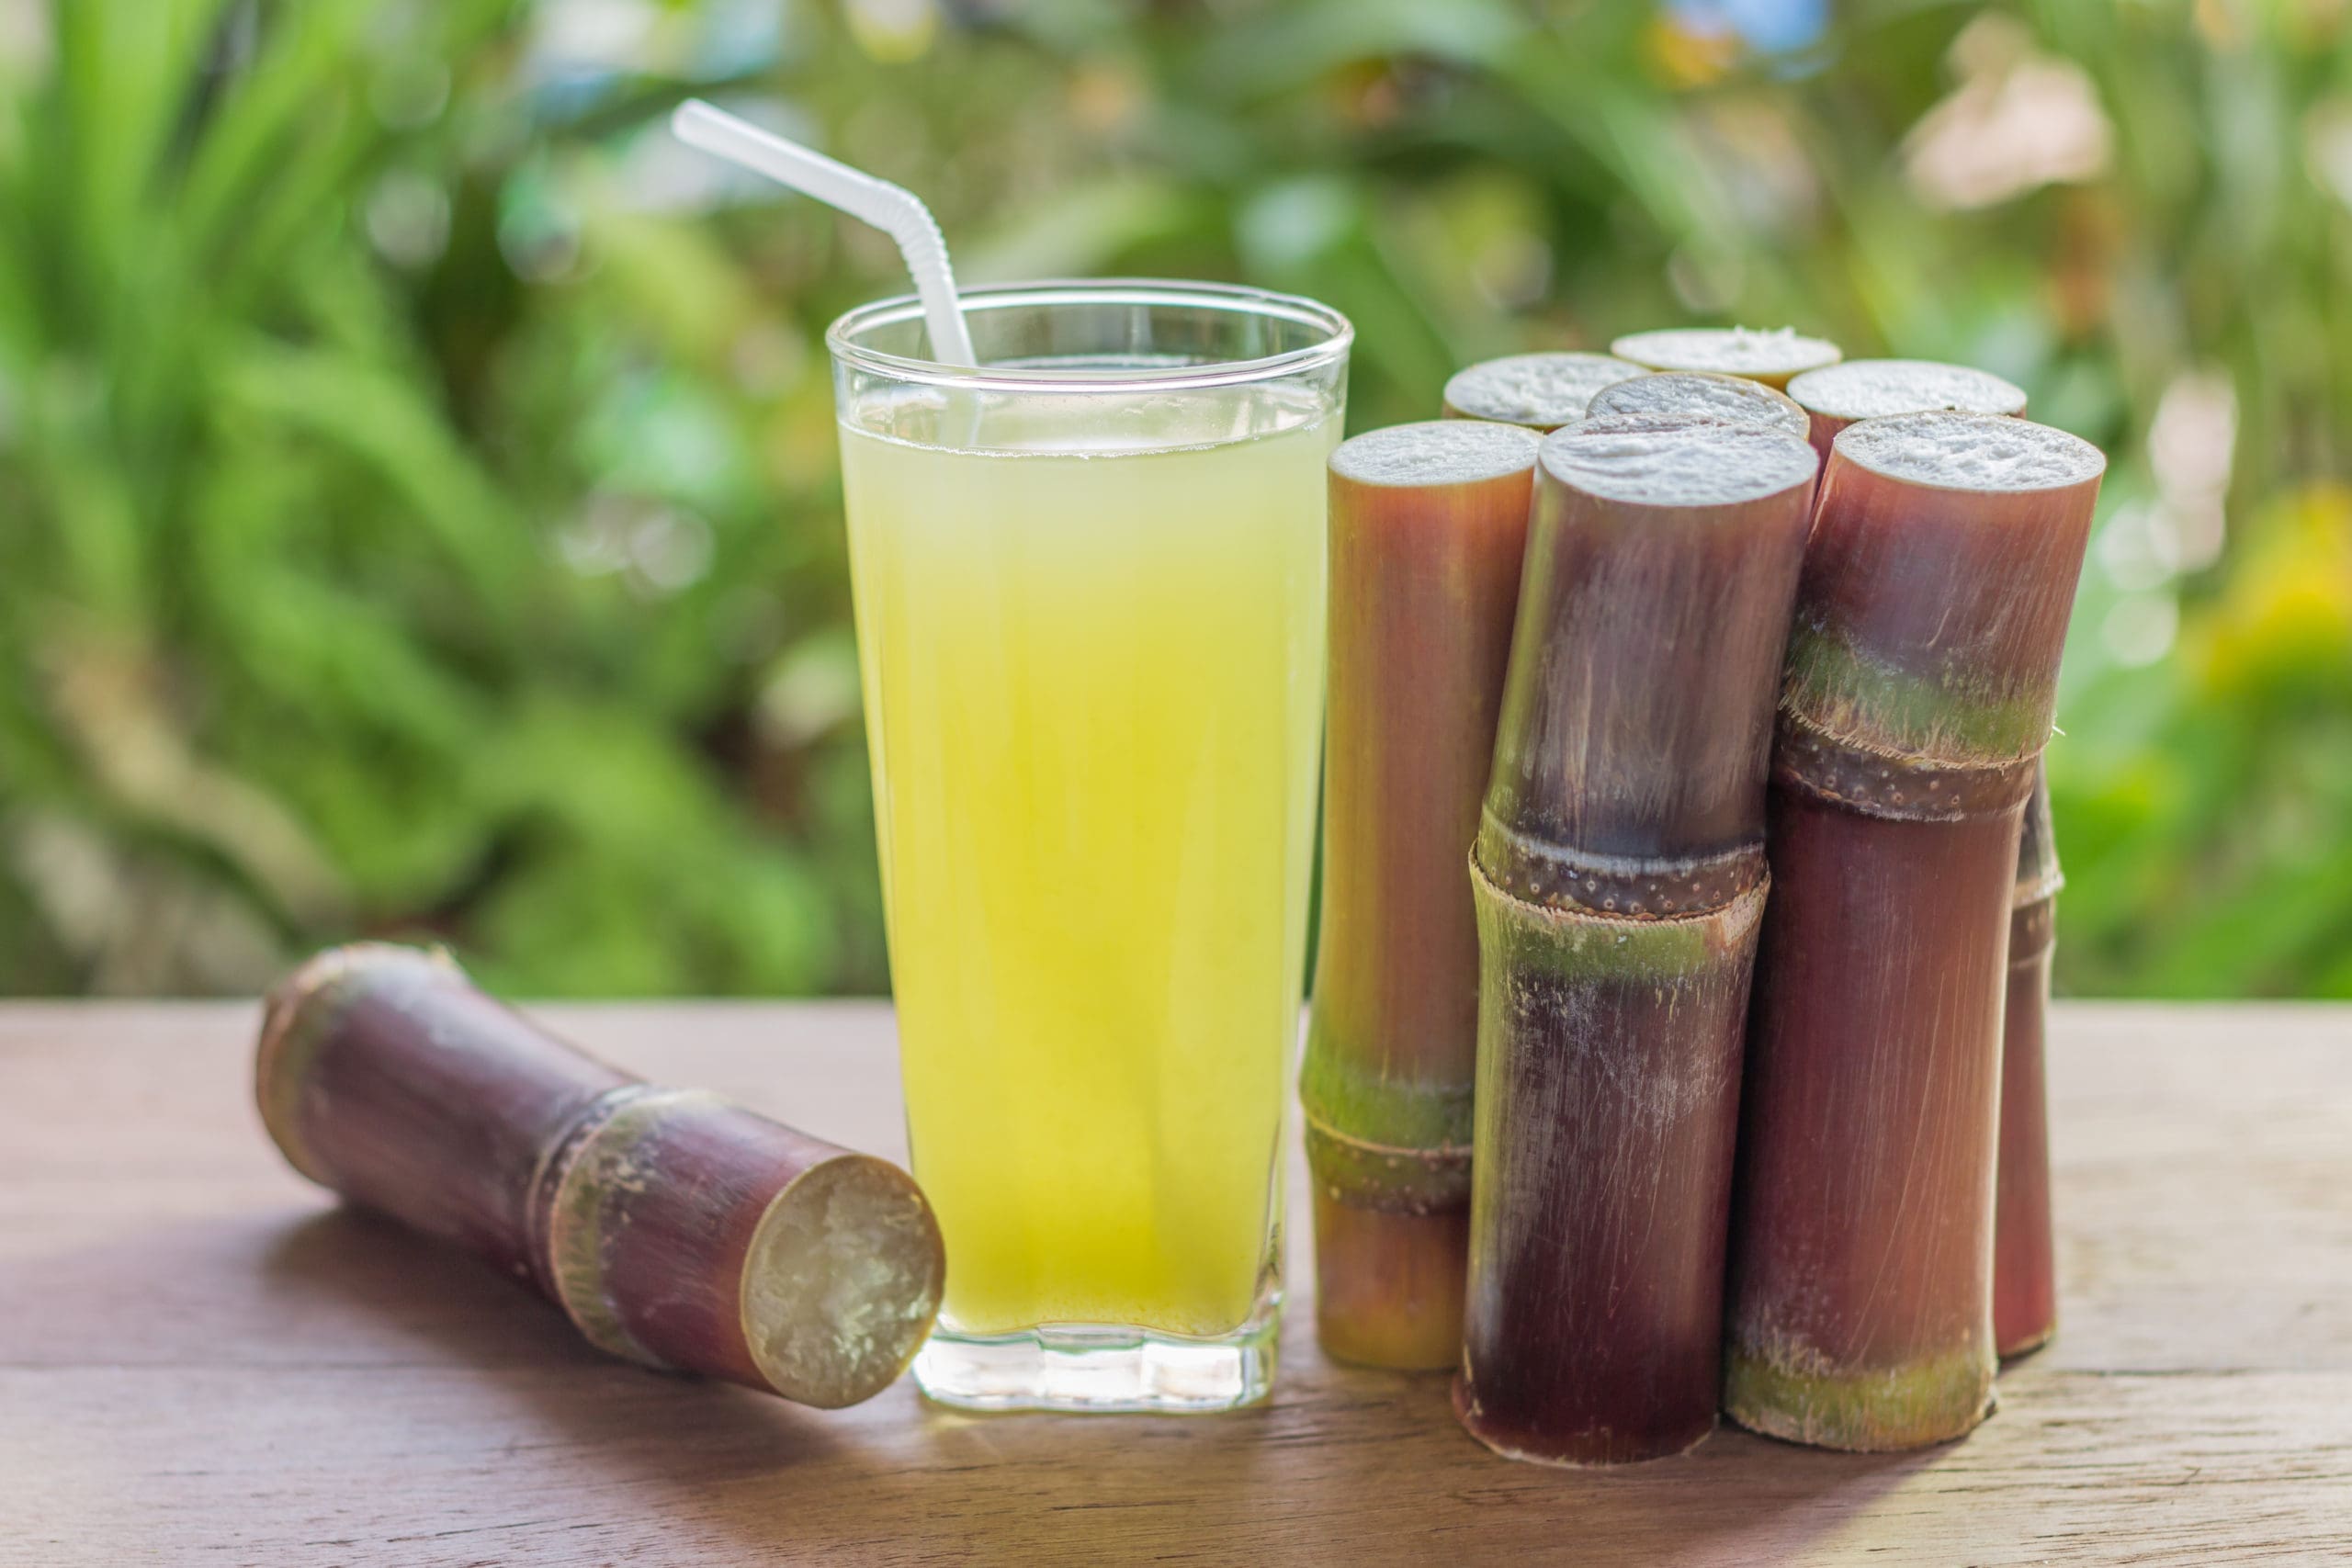 How Sugarcane Juice Is Served Around the World